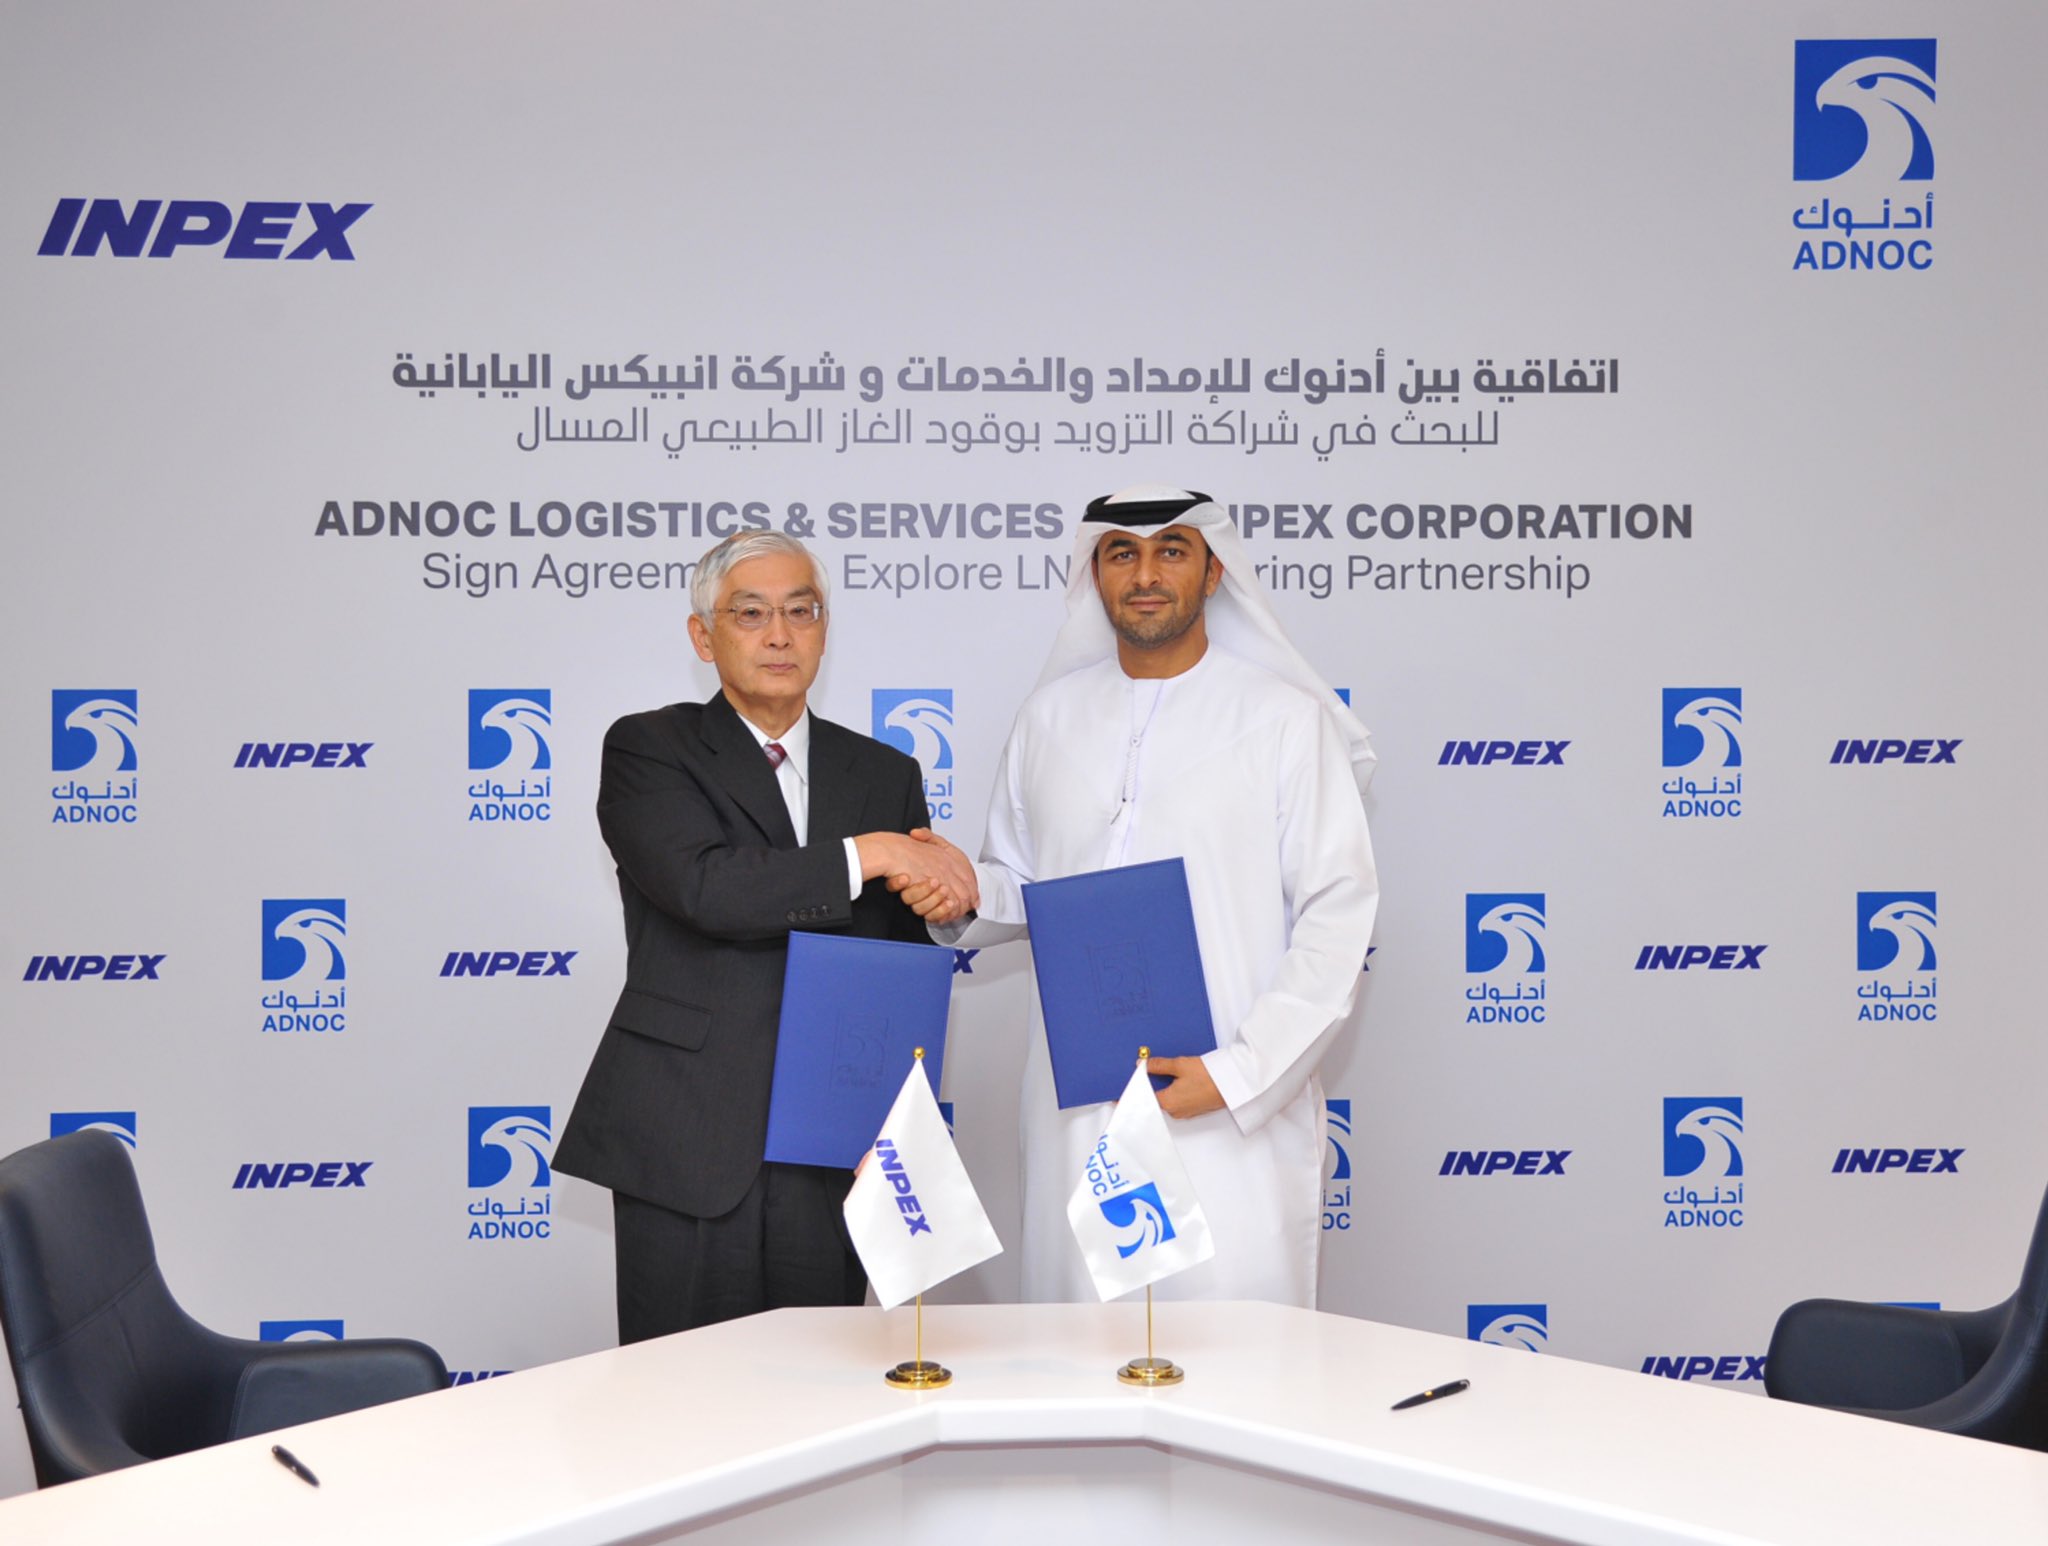 ADNOC, Inpex join forces on LNG bunkering in UAE